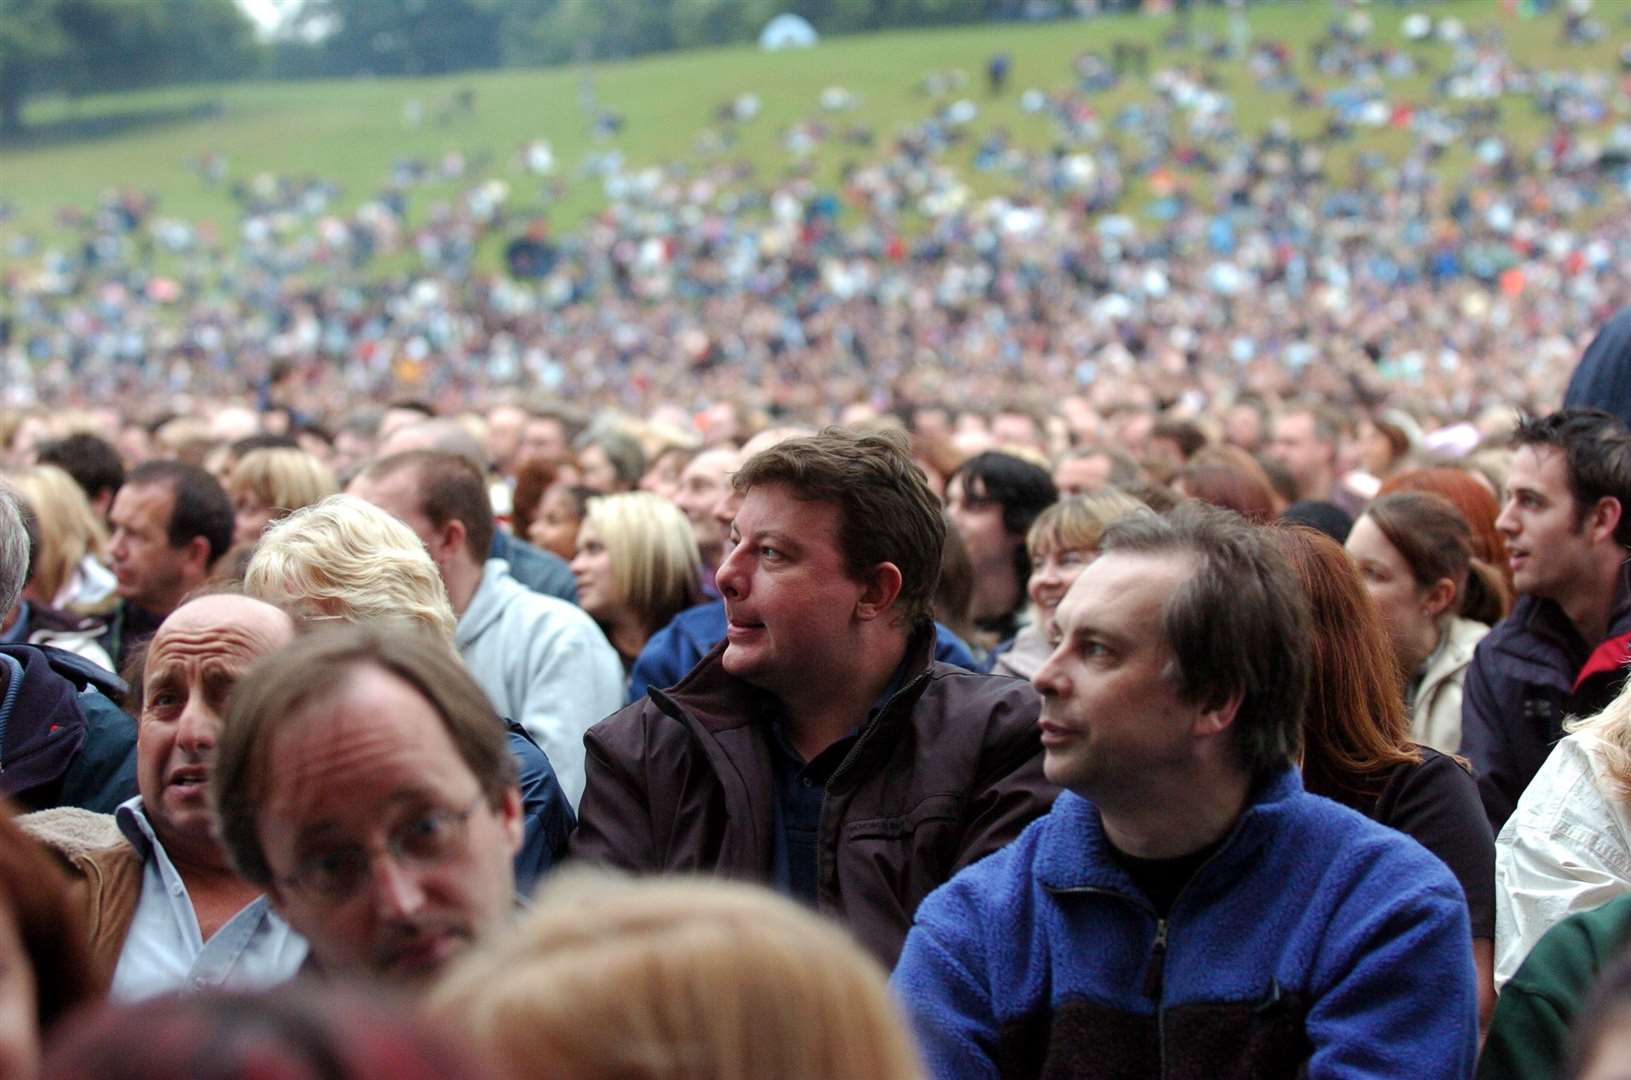 Thousands of people gathered to see Meat Loaf at Leeds Castle in 2005